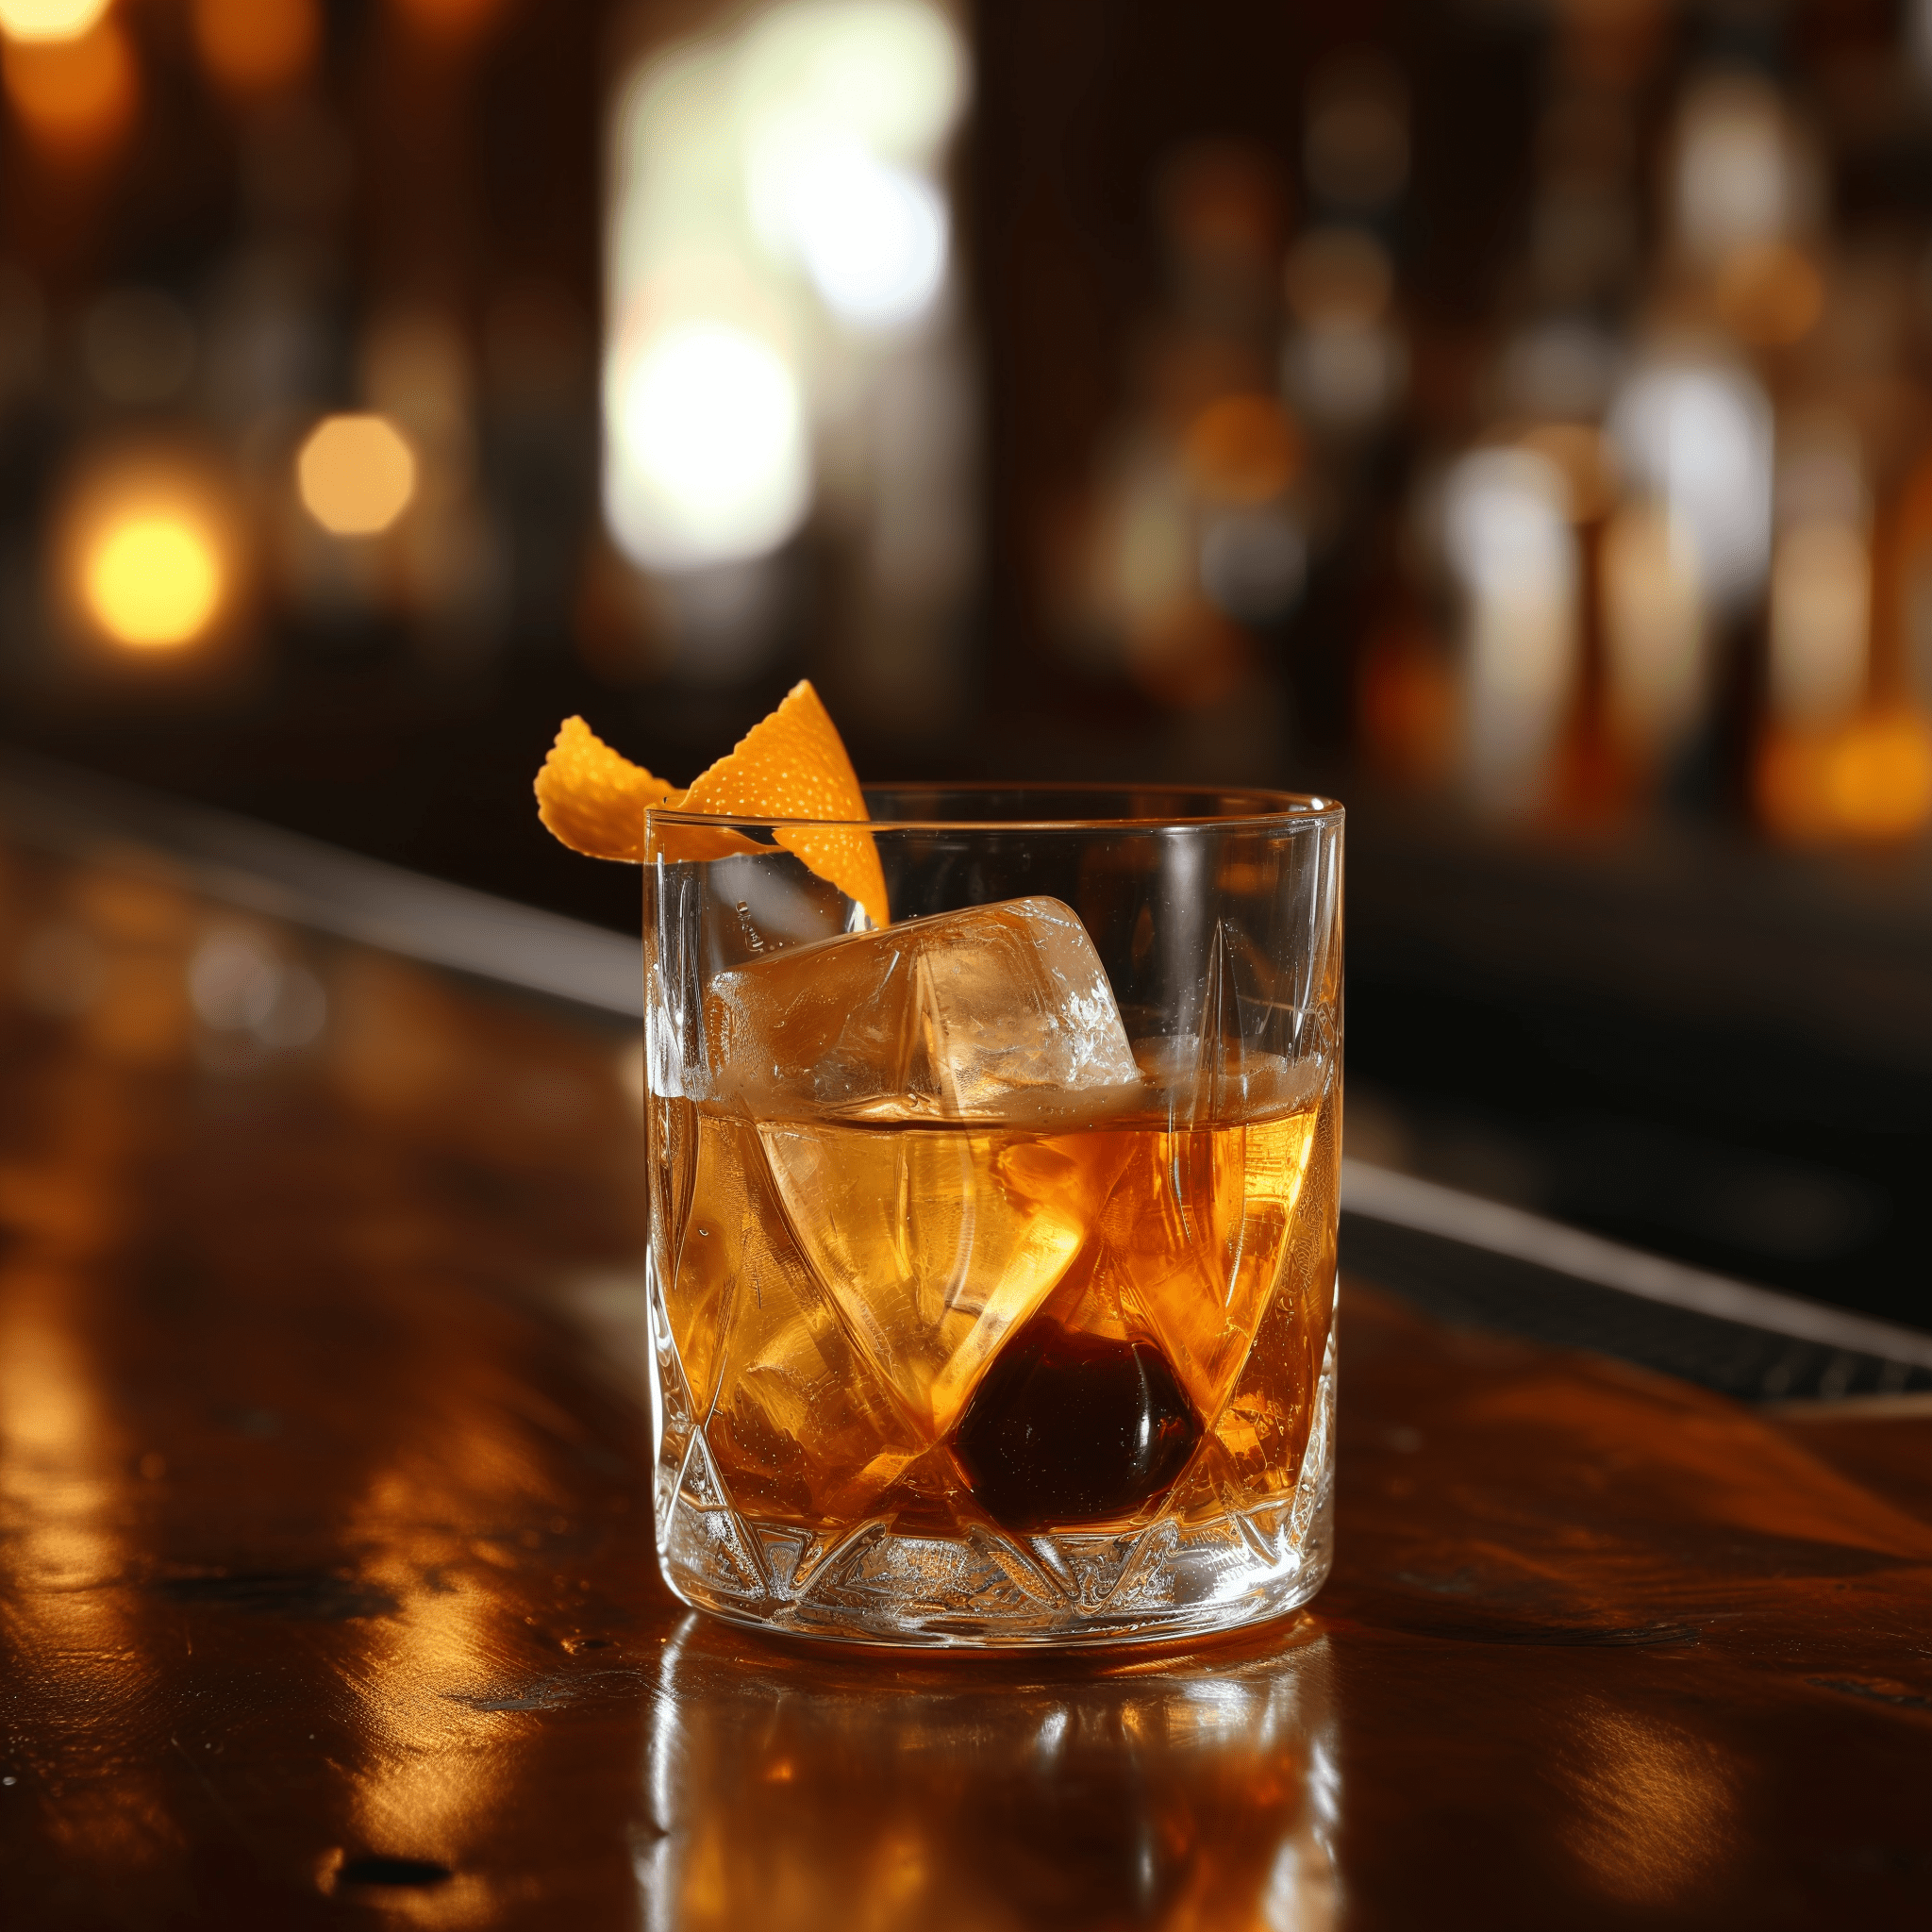 Port Old Fashioned Cocktail Recipe - The Port Old Fashioned offers a harmonious blend of sweet and oaky flavors, with the marmalade providing a subtle citrus note. The aged port and bourbon deliver a robust and warming mouthfeel, while the soda adds a light effervescence that balances the drink's richness.